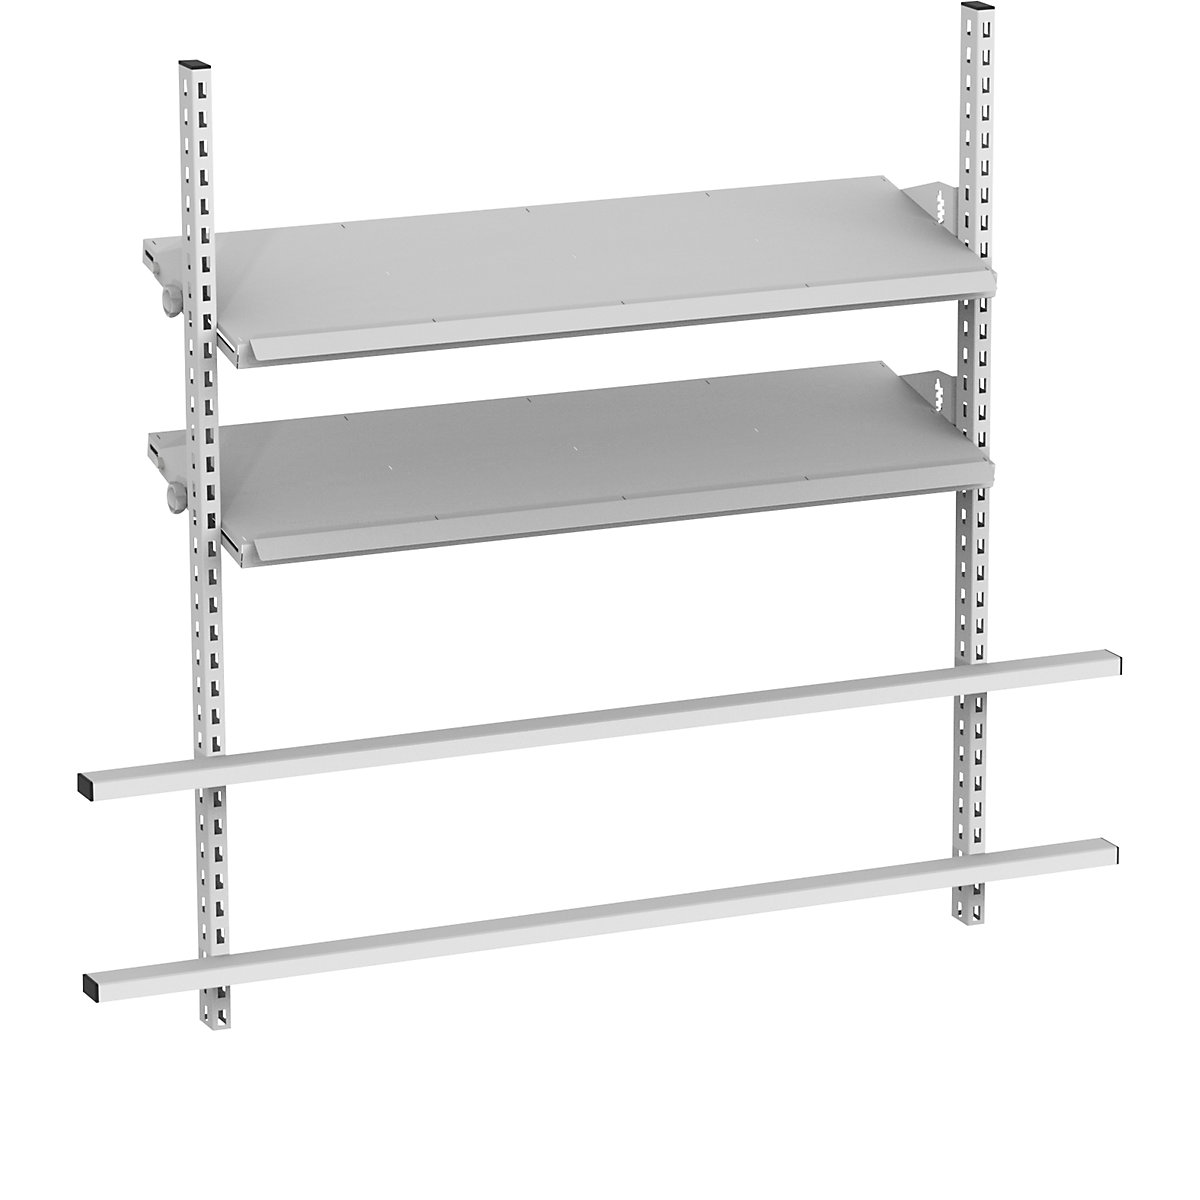 Add-on for table with inclined shelves, with 2 supports and 2 shelves, width 1685 mm-1